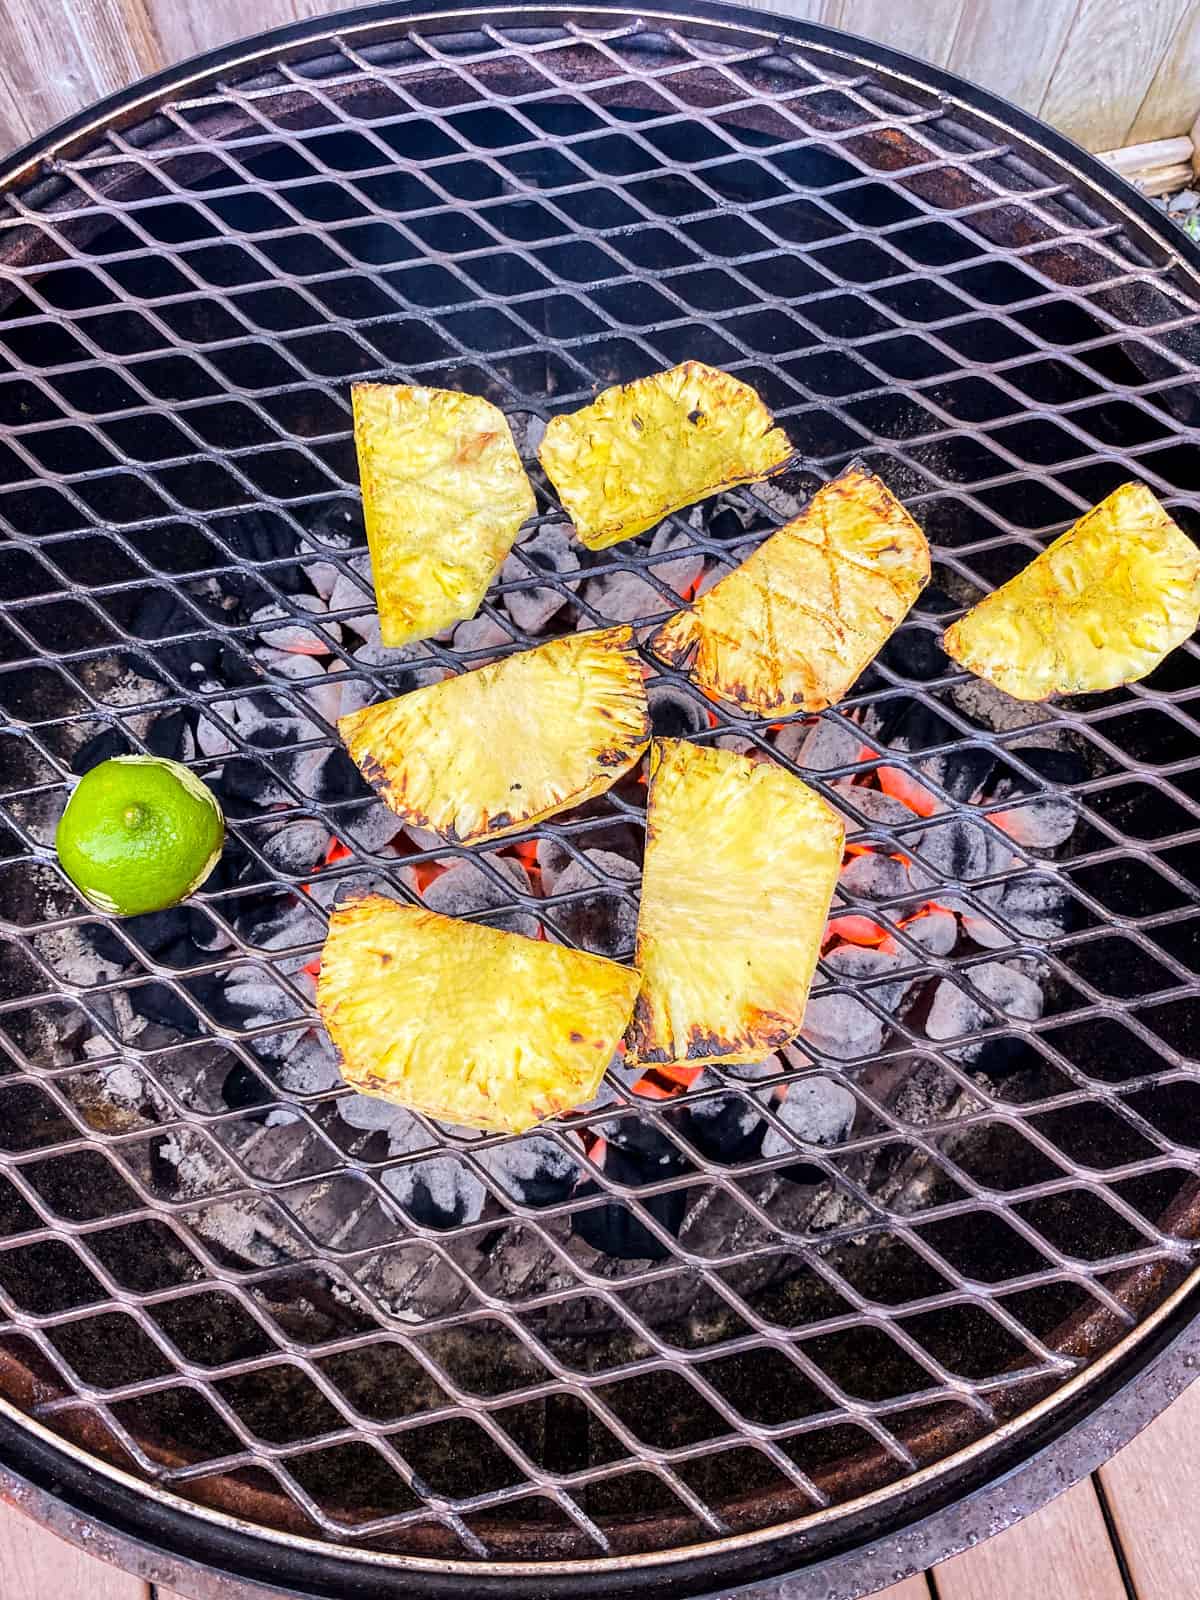 Grill pineapple slices until charred on the edges.